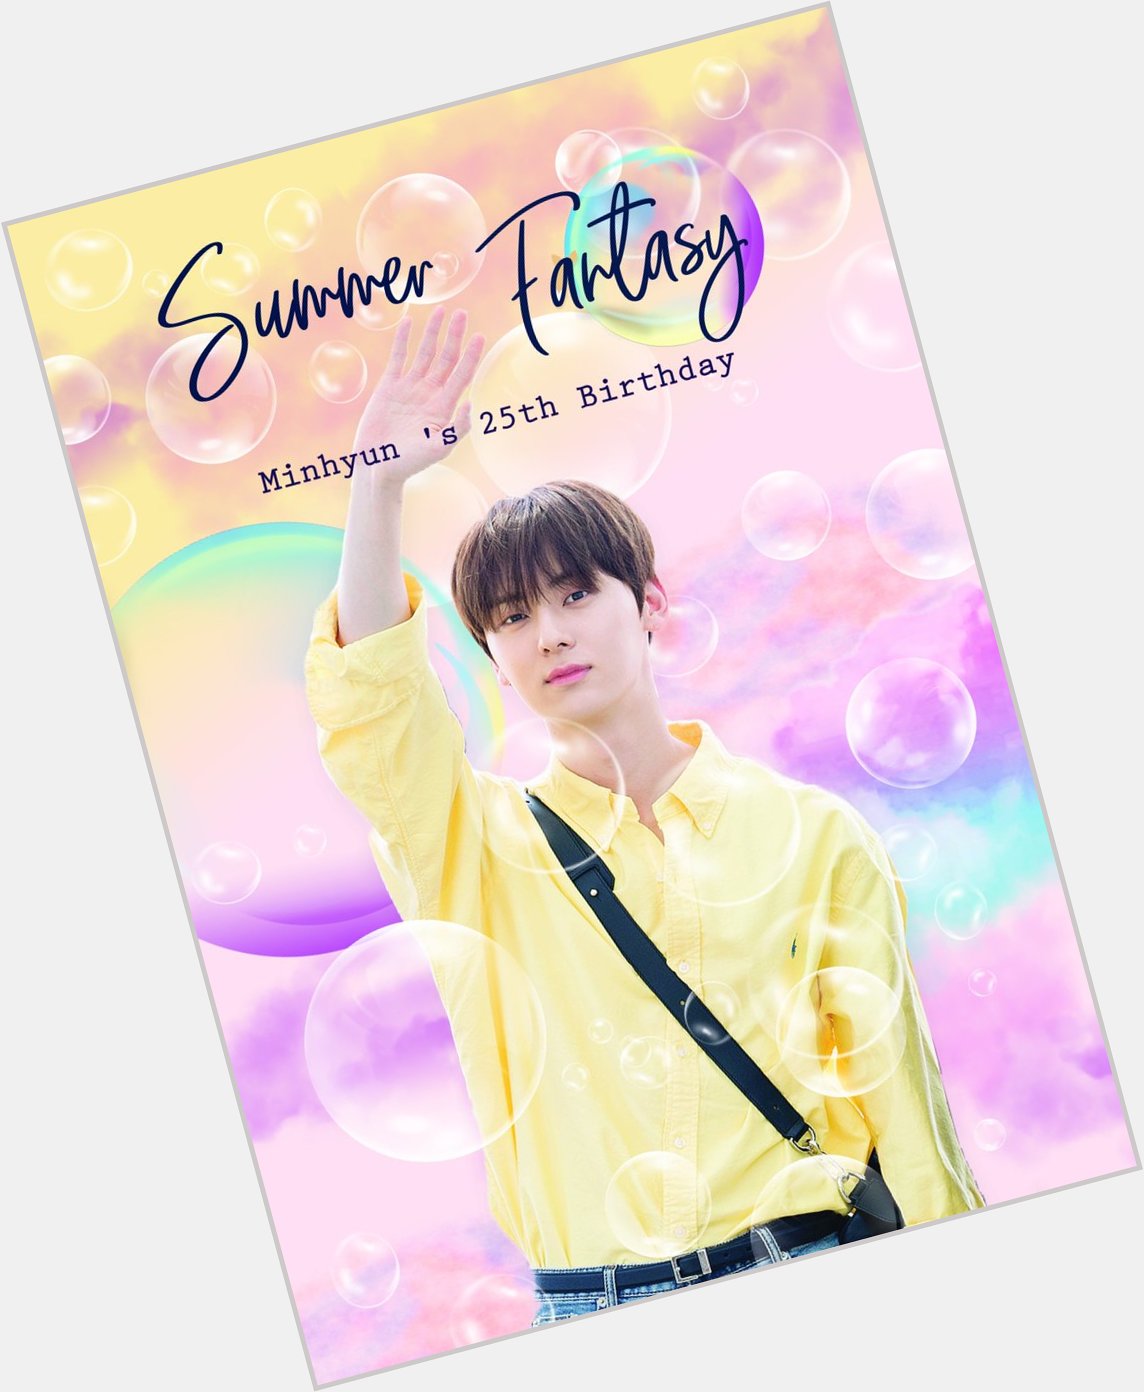 *° Summer Fantasy °*
celebrating the birth of our majestic prince

~ happy birthday Minhyun ~ 